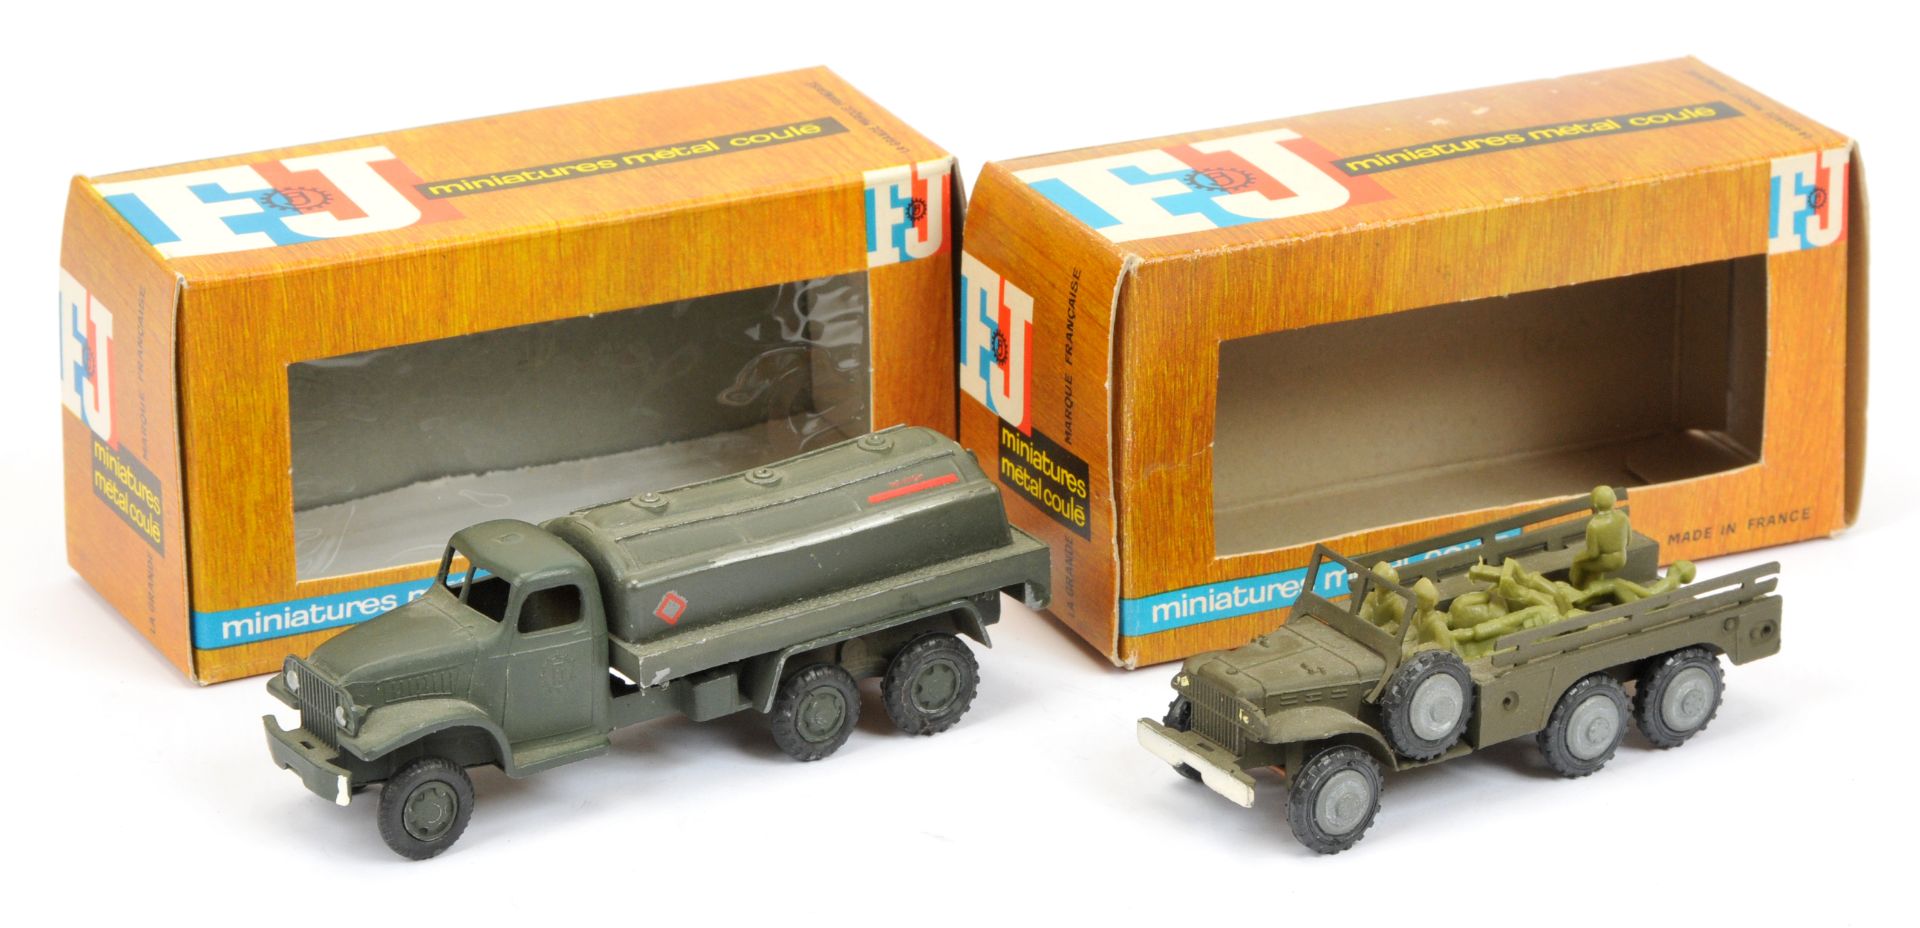 FJ Military a pair  - (1) Fuel tanker  - Drab green including hubs and (2) Troop transporte